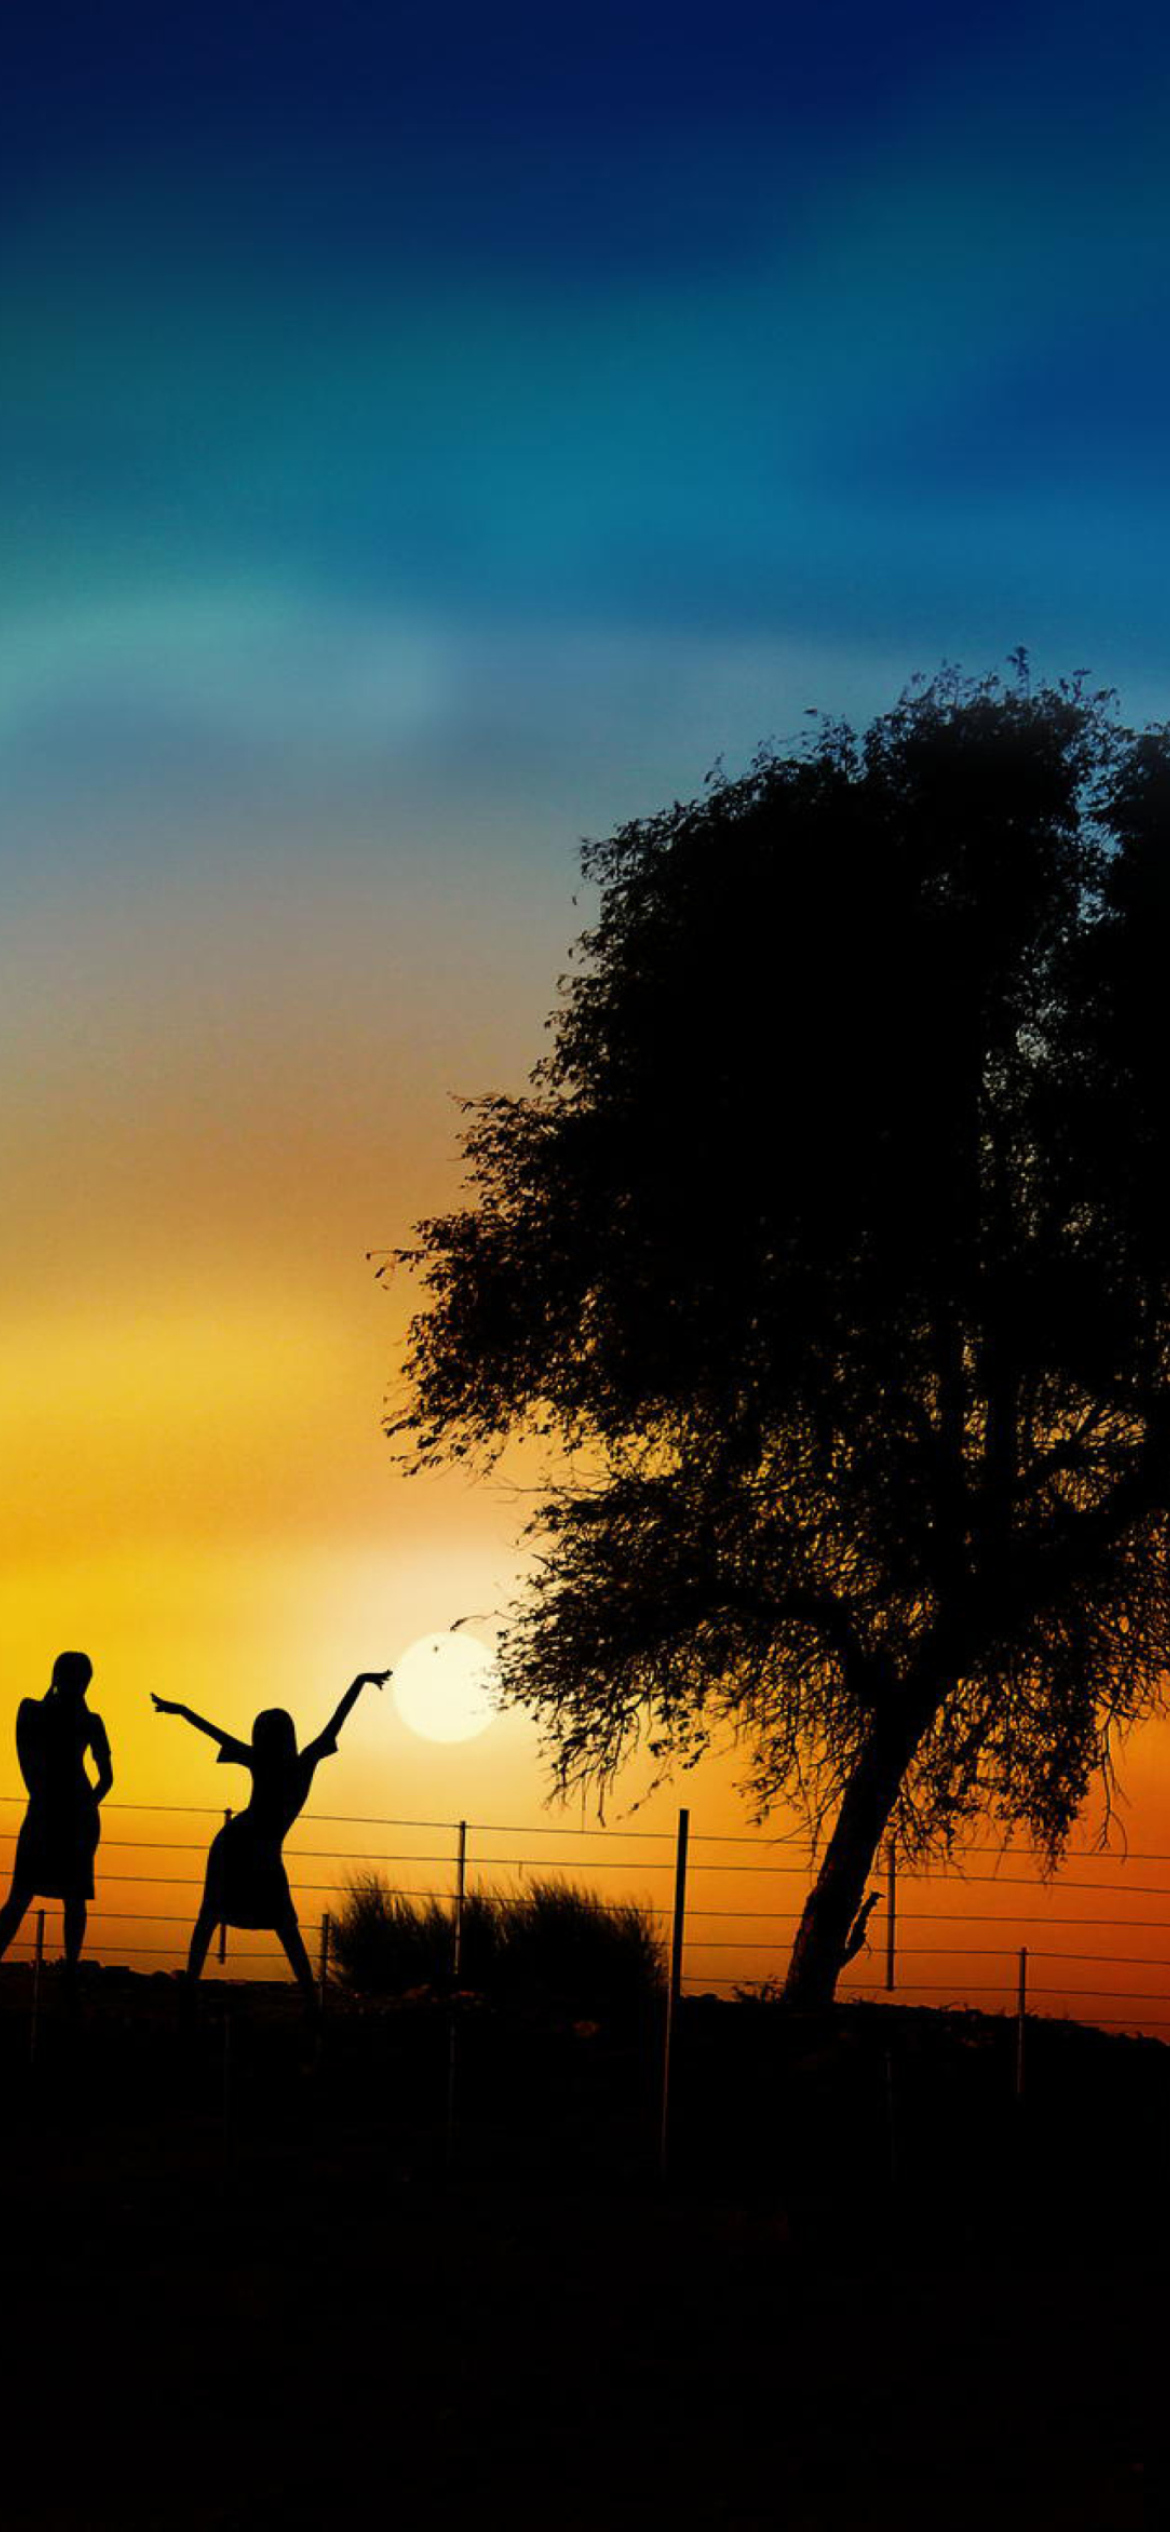 Couple Silhouettes Under Tree At Sunset screenshot #1 1170x2532